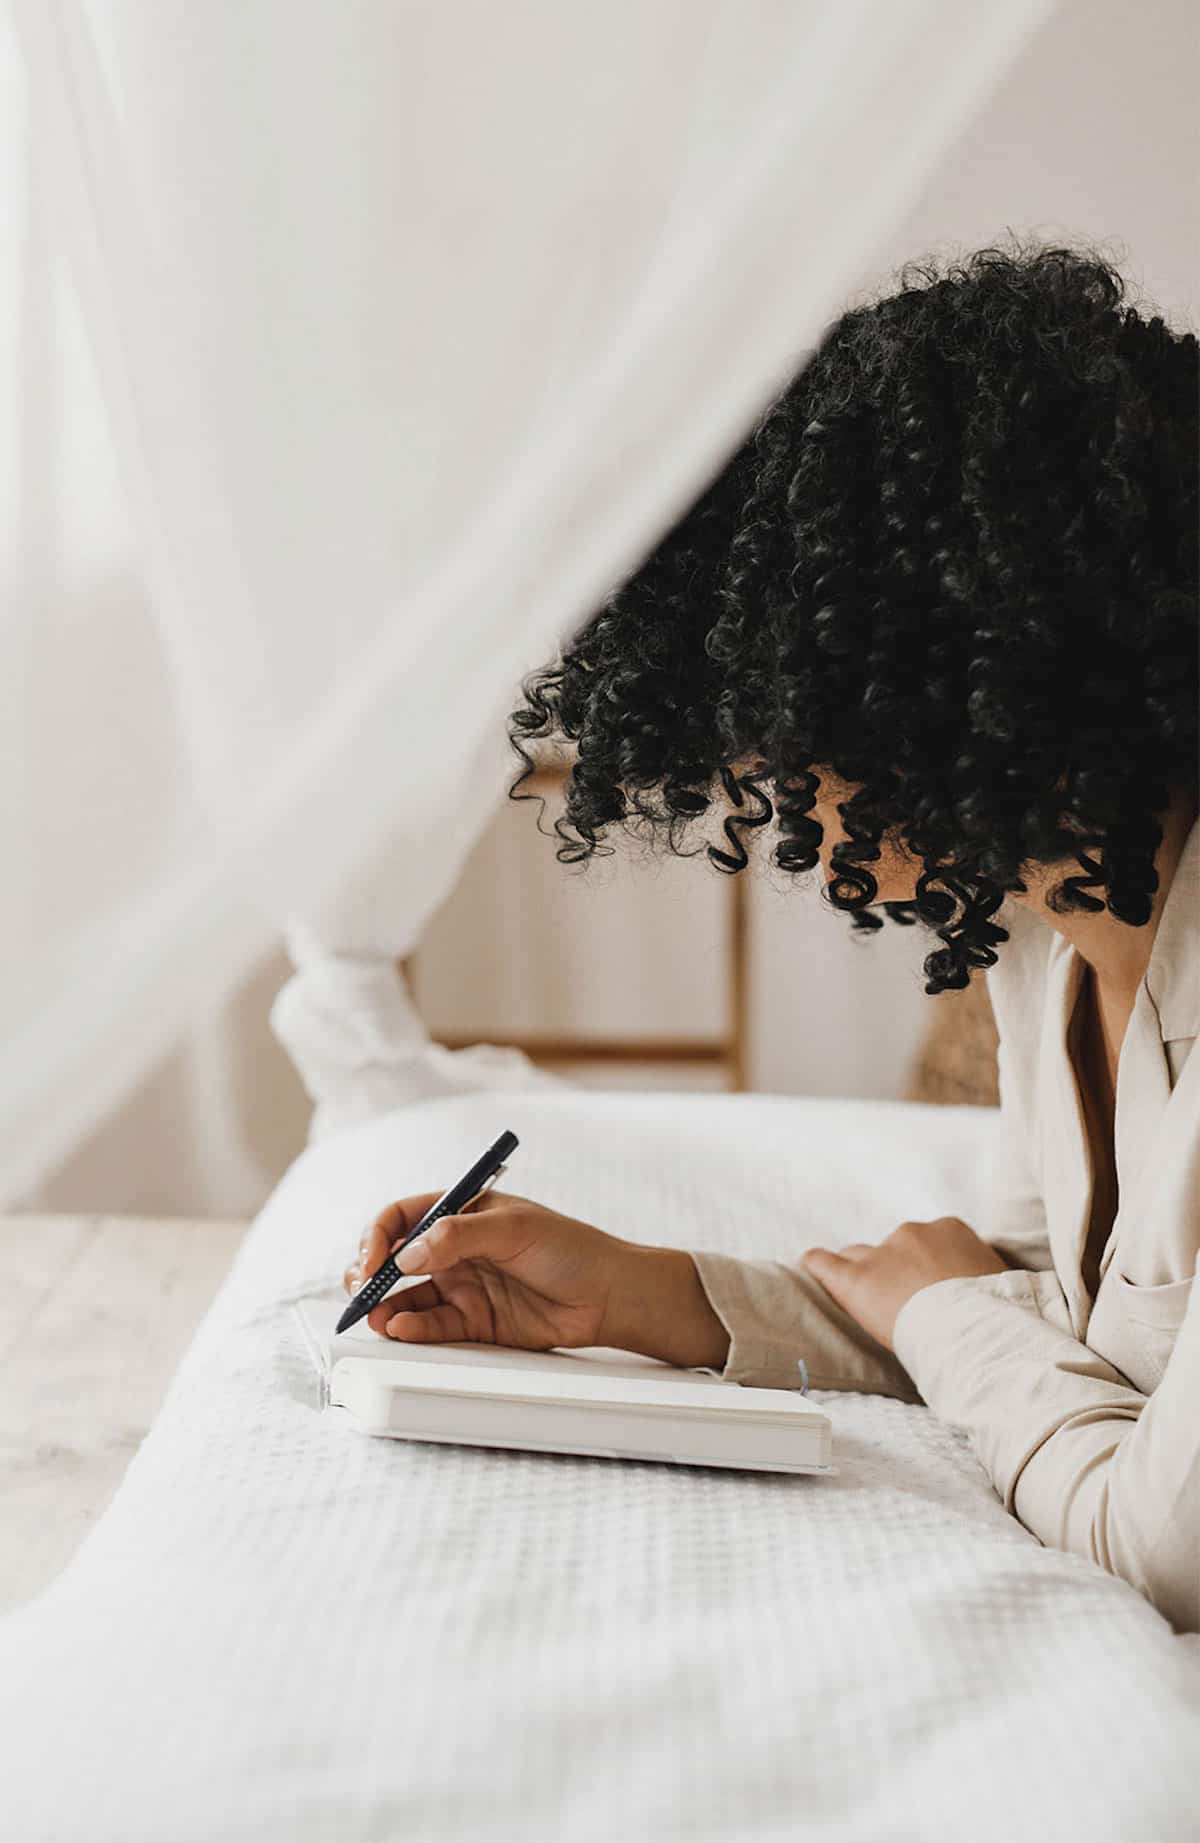 So you've discovered positive affirmations and want to start incorporating them in your daily life. Congratulations! Here is how you can start writing your affirmations for 21 days and why you should do it.